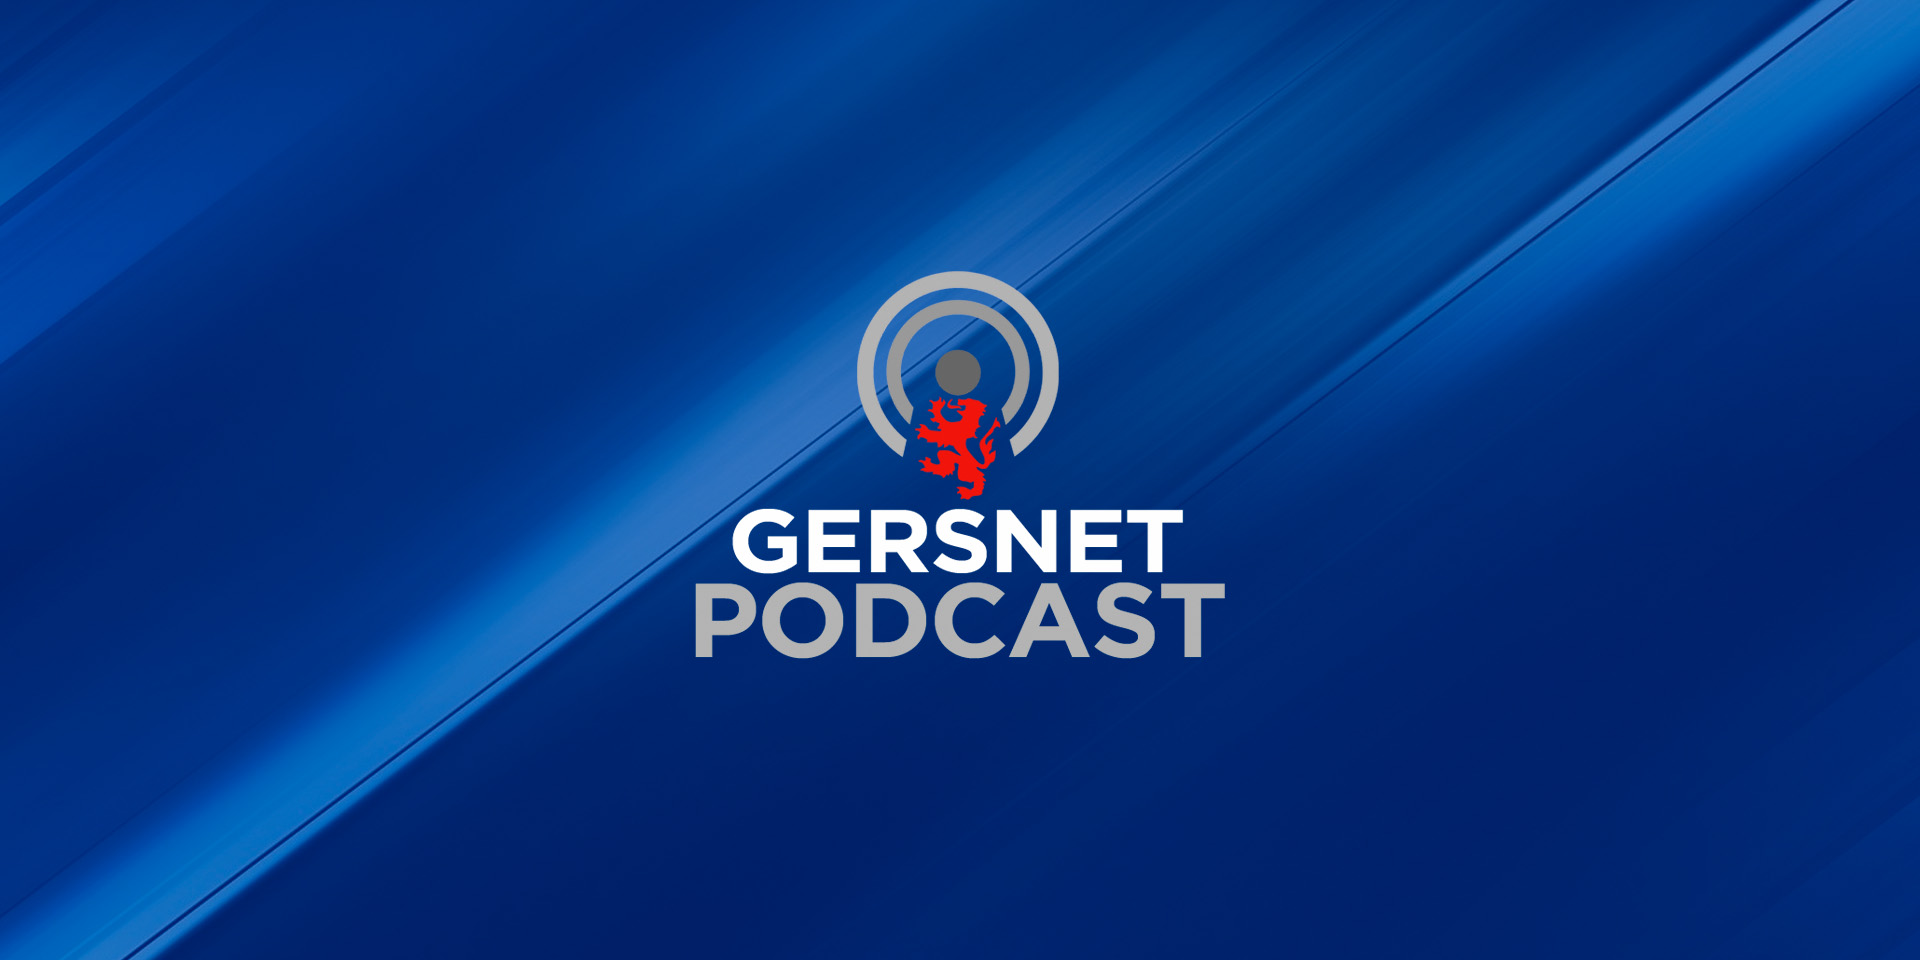 Gersnet Podcast 271 - Beating the Buddies